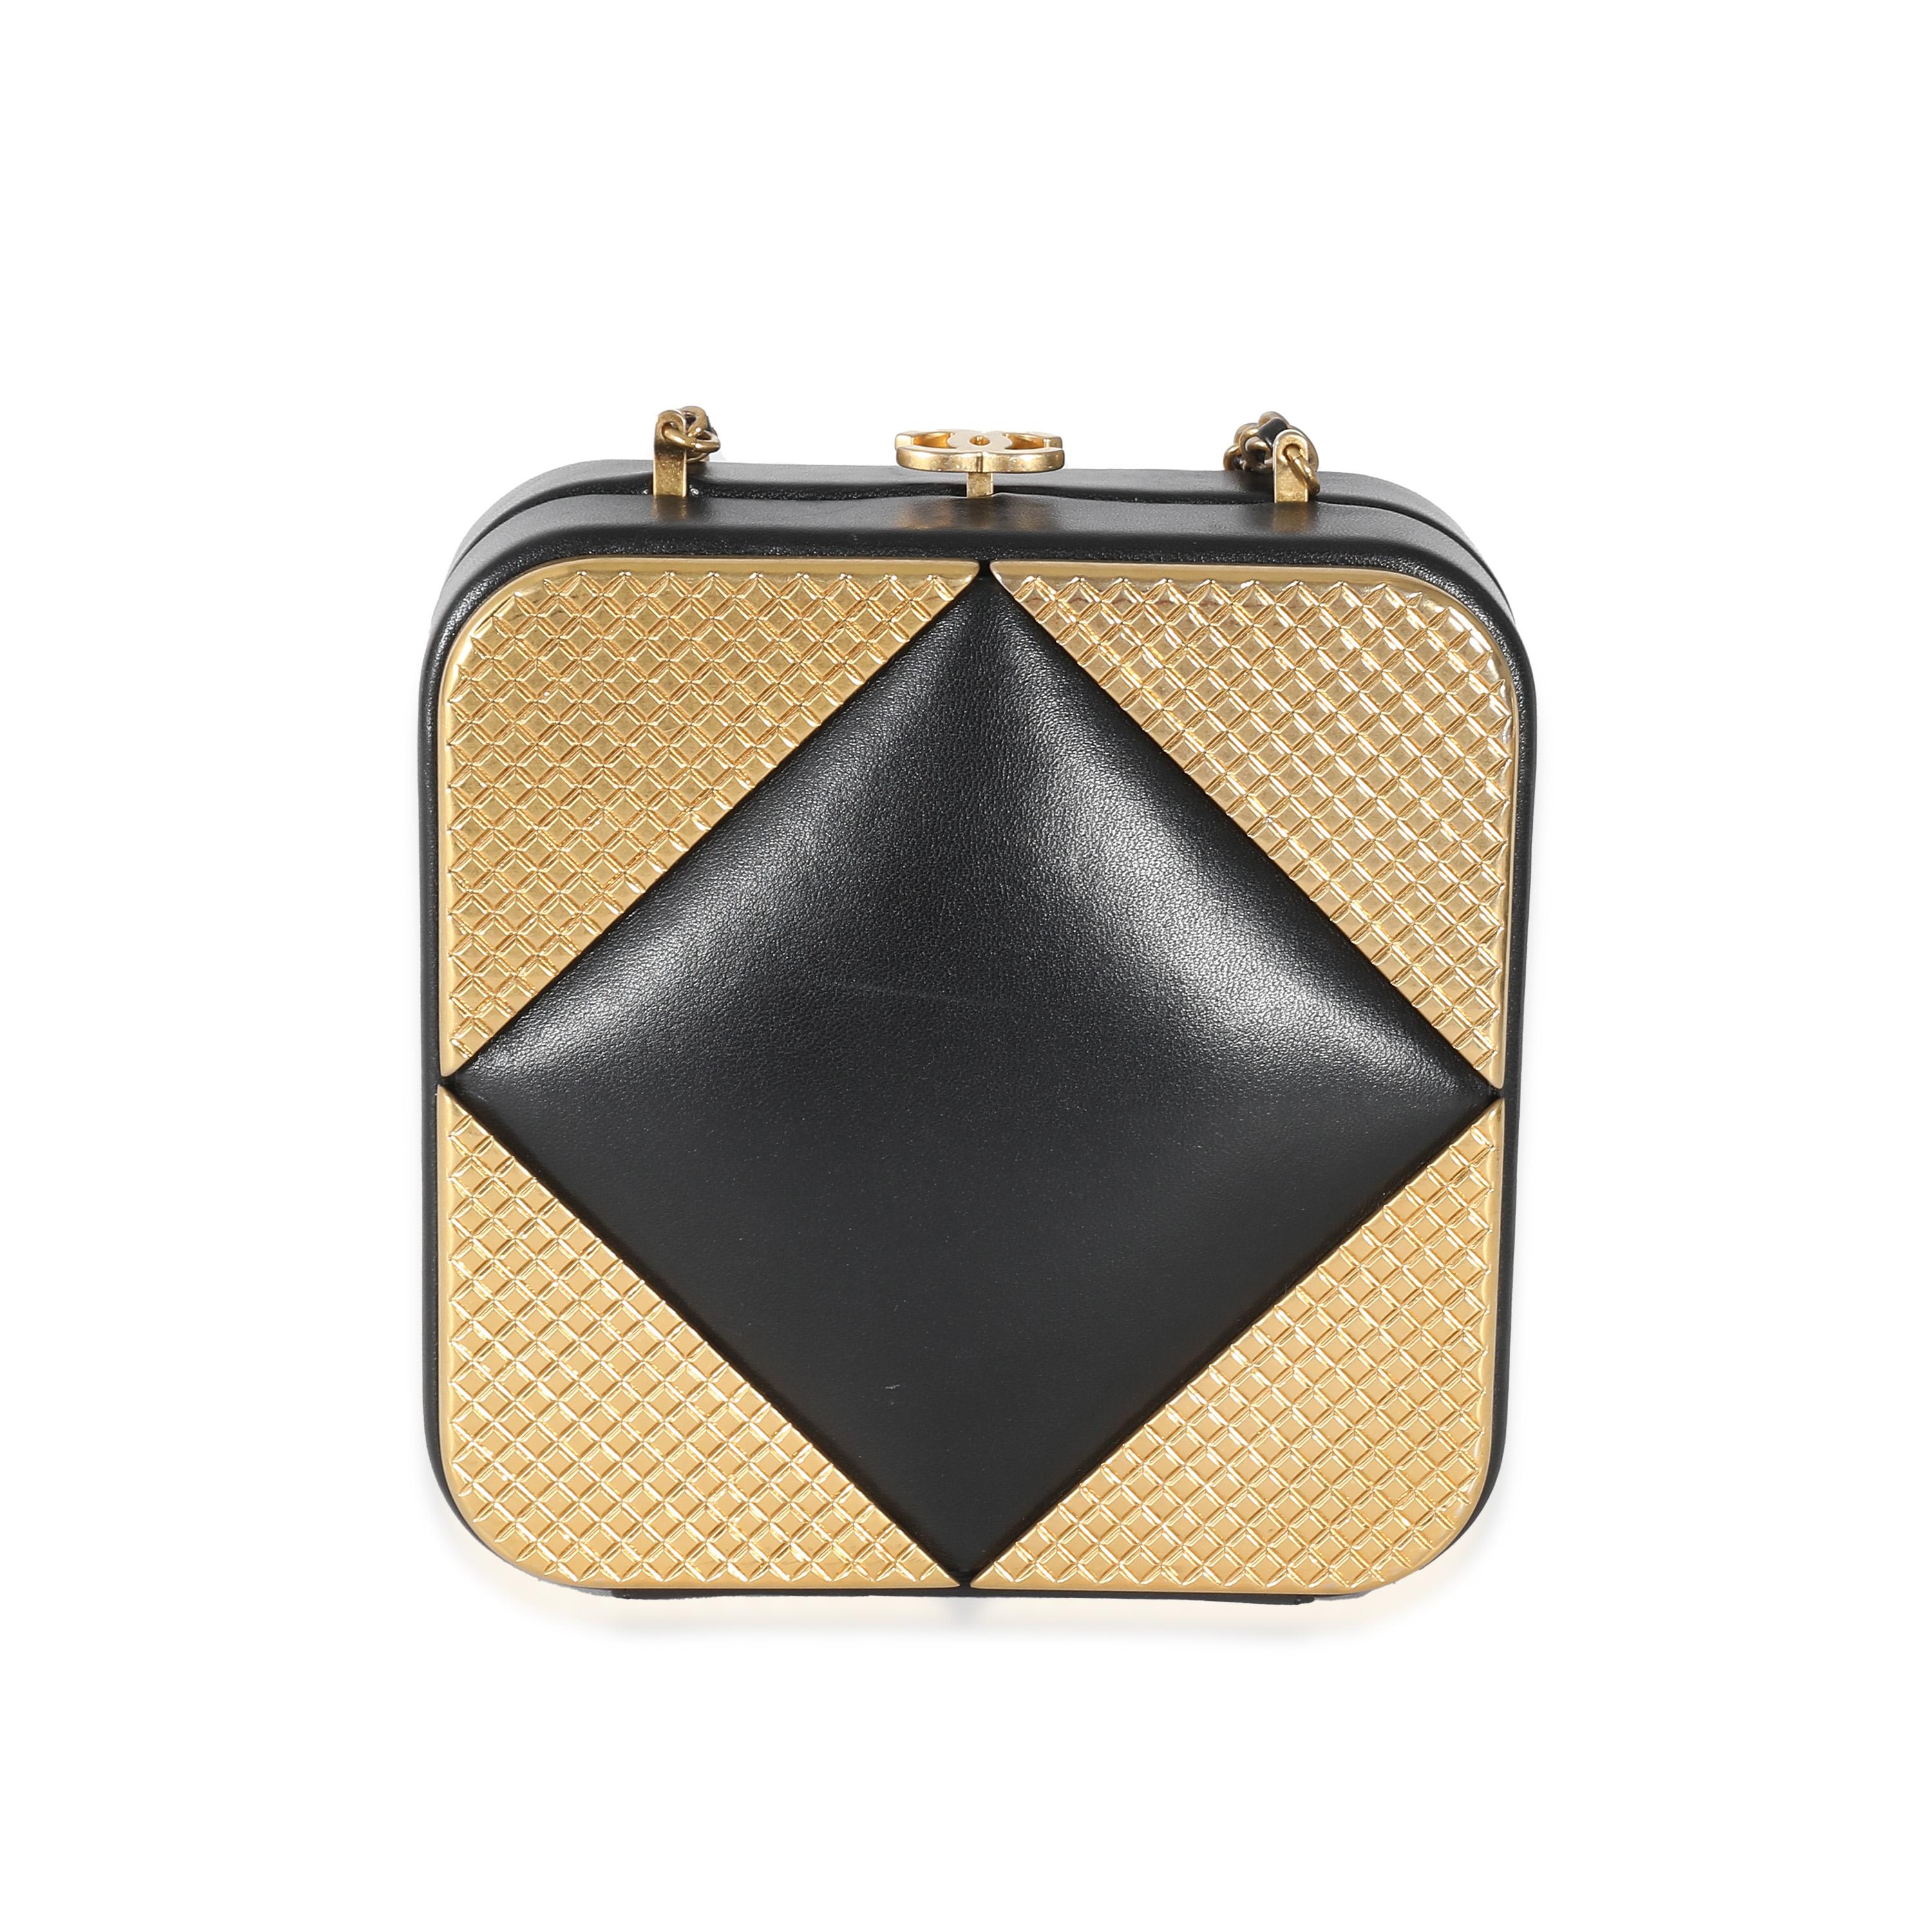 Chanel Black Lambskin Gold Metal Square CC Clutch In Excellent Condition For Sale In New York, NY